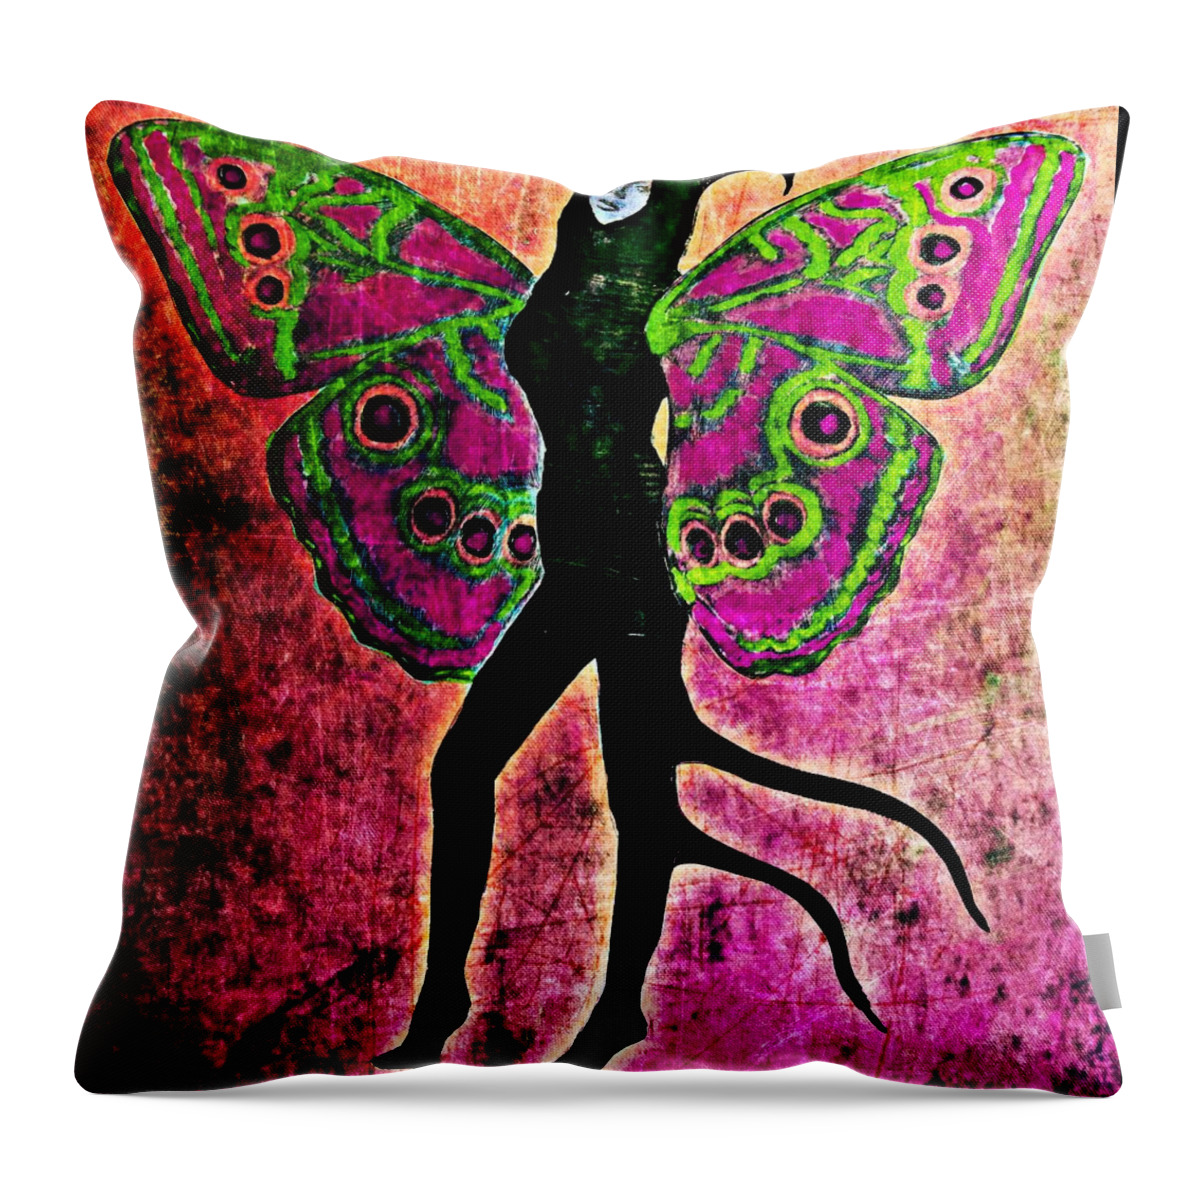 Women Throw Pillow featuring the digital art Wings 11 by Maria Huntley